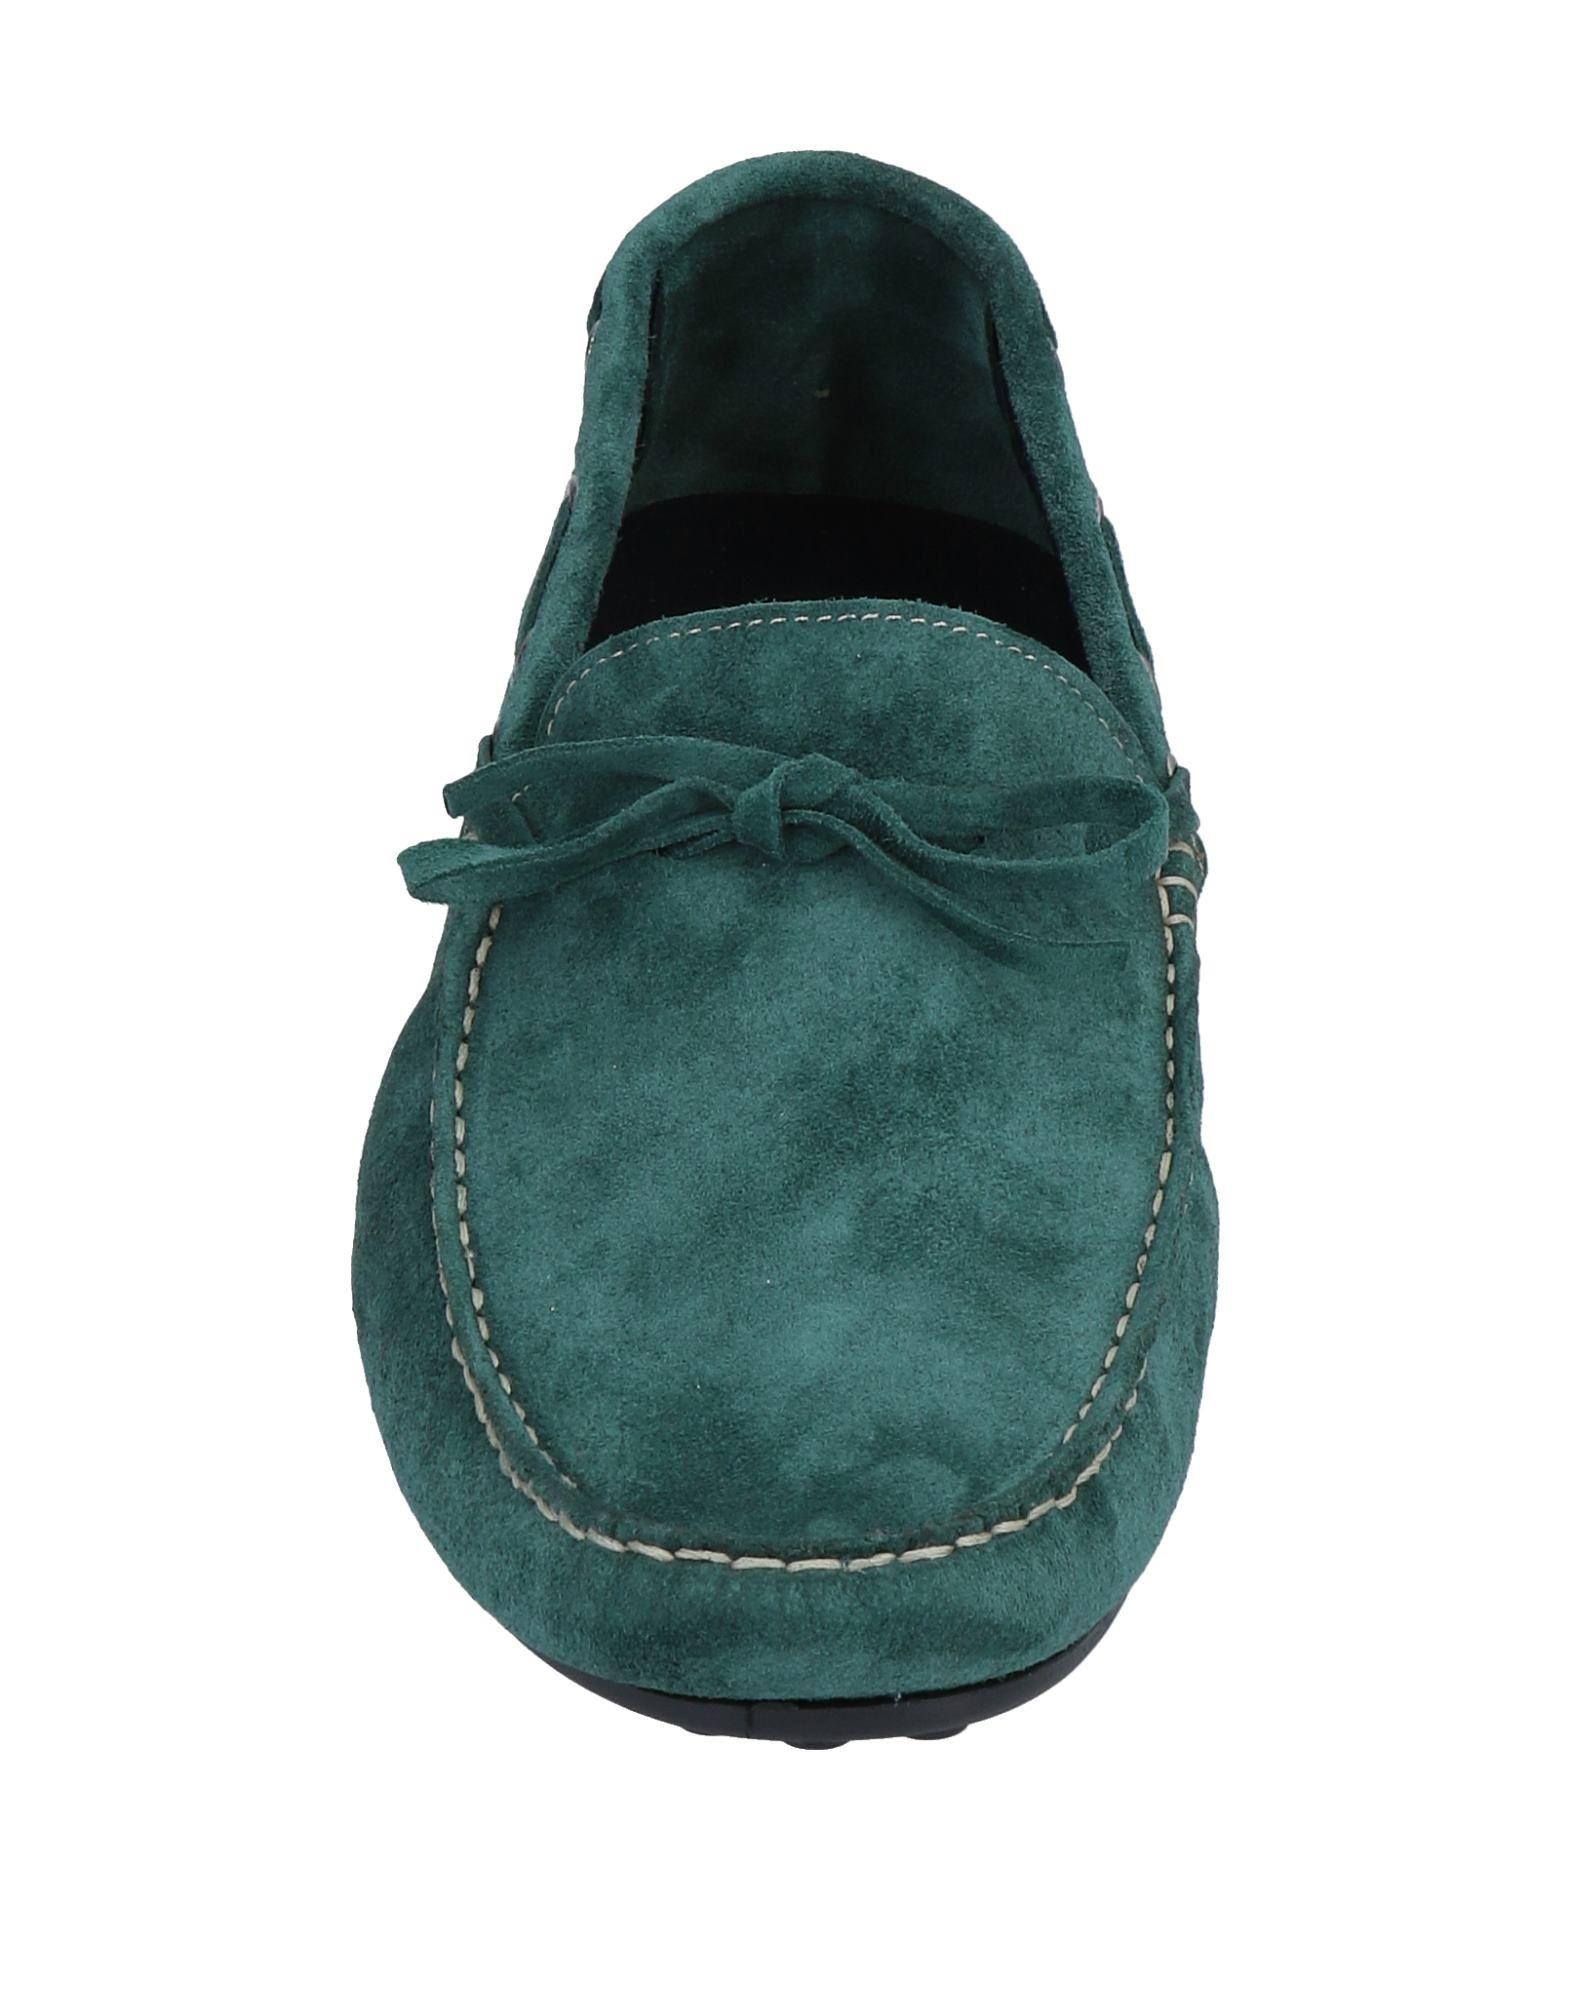 AT.P.CO Suede Loafer in Dark Green (Green) for Men - Lyst